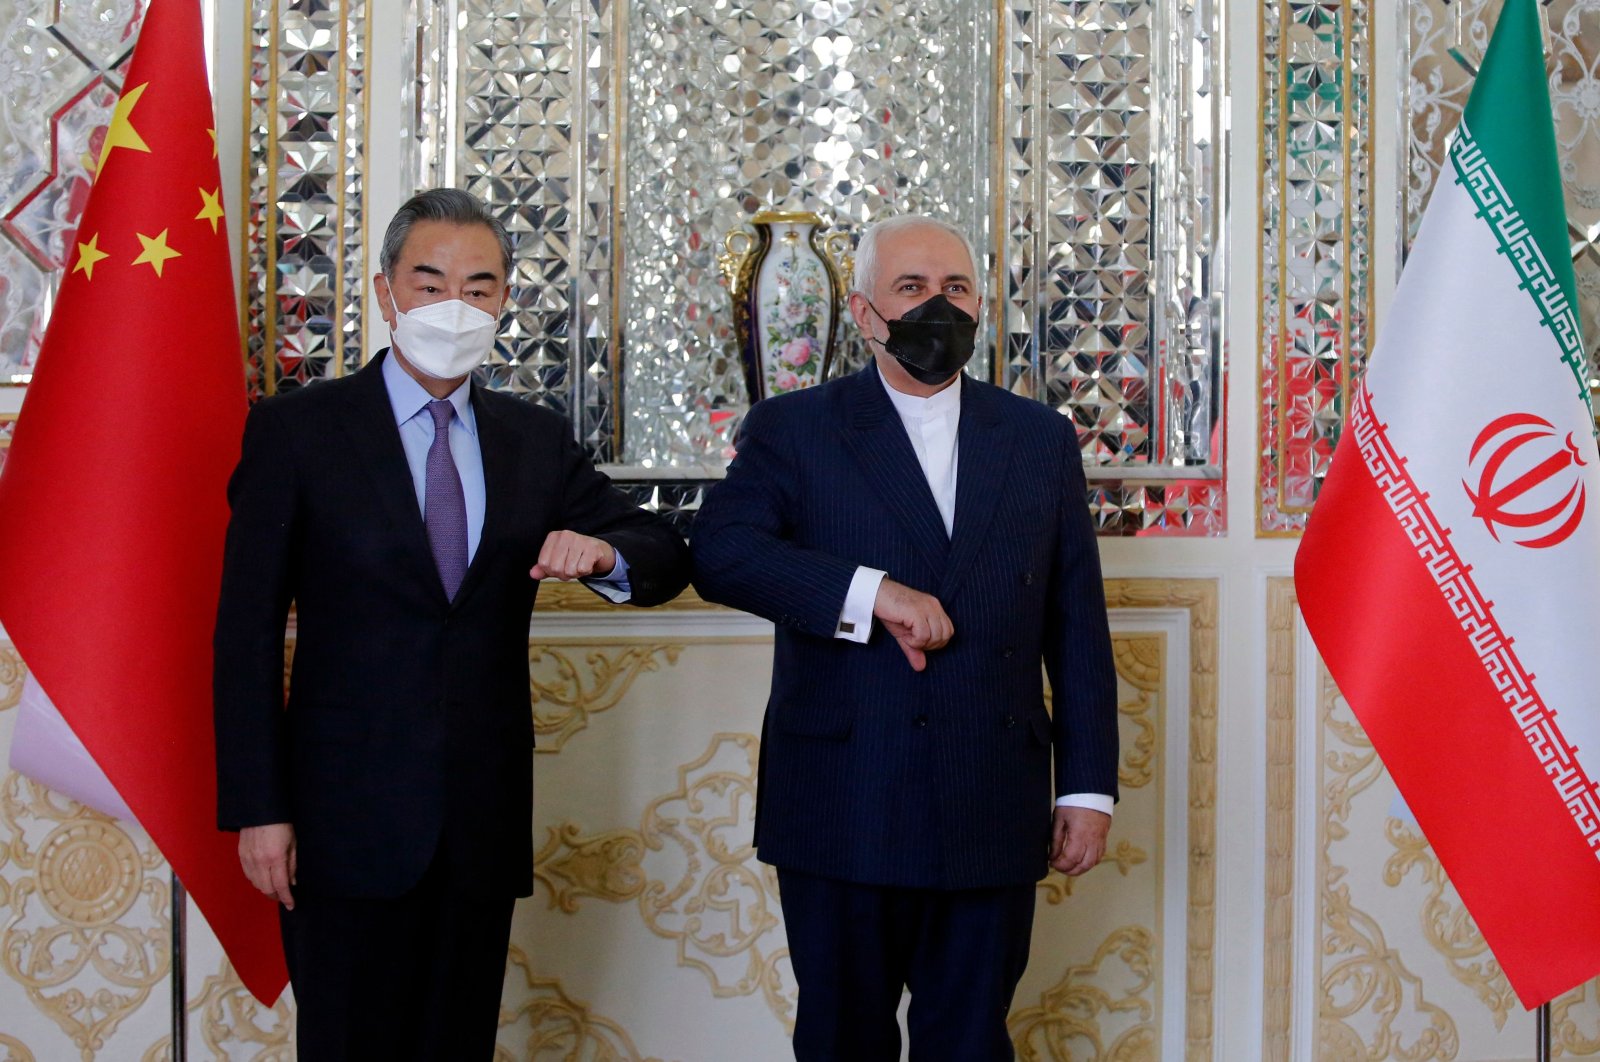 Iranian Foreign Minister Mohammad Javad Zarif (R) greets his Chinese counterpart Wang Yi, in Tehran, Iran, March 27, 2021. (AFP Photo)